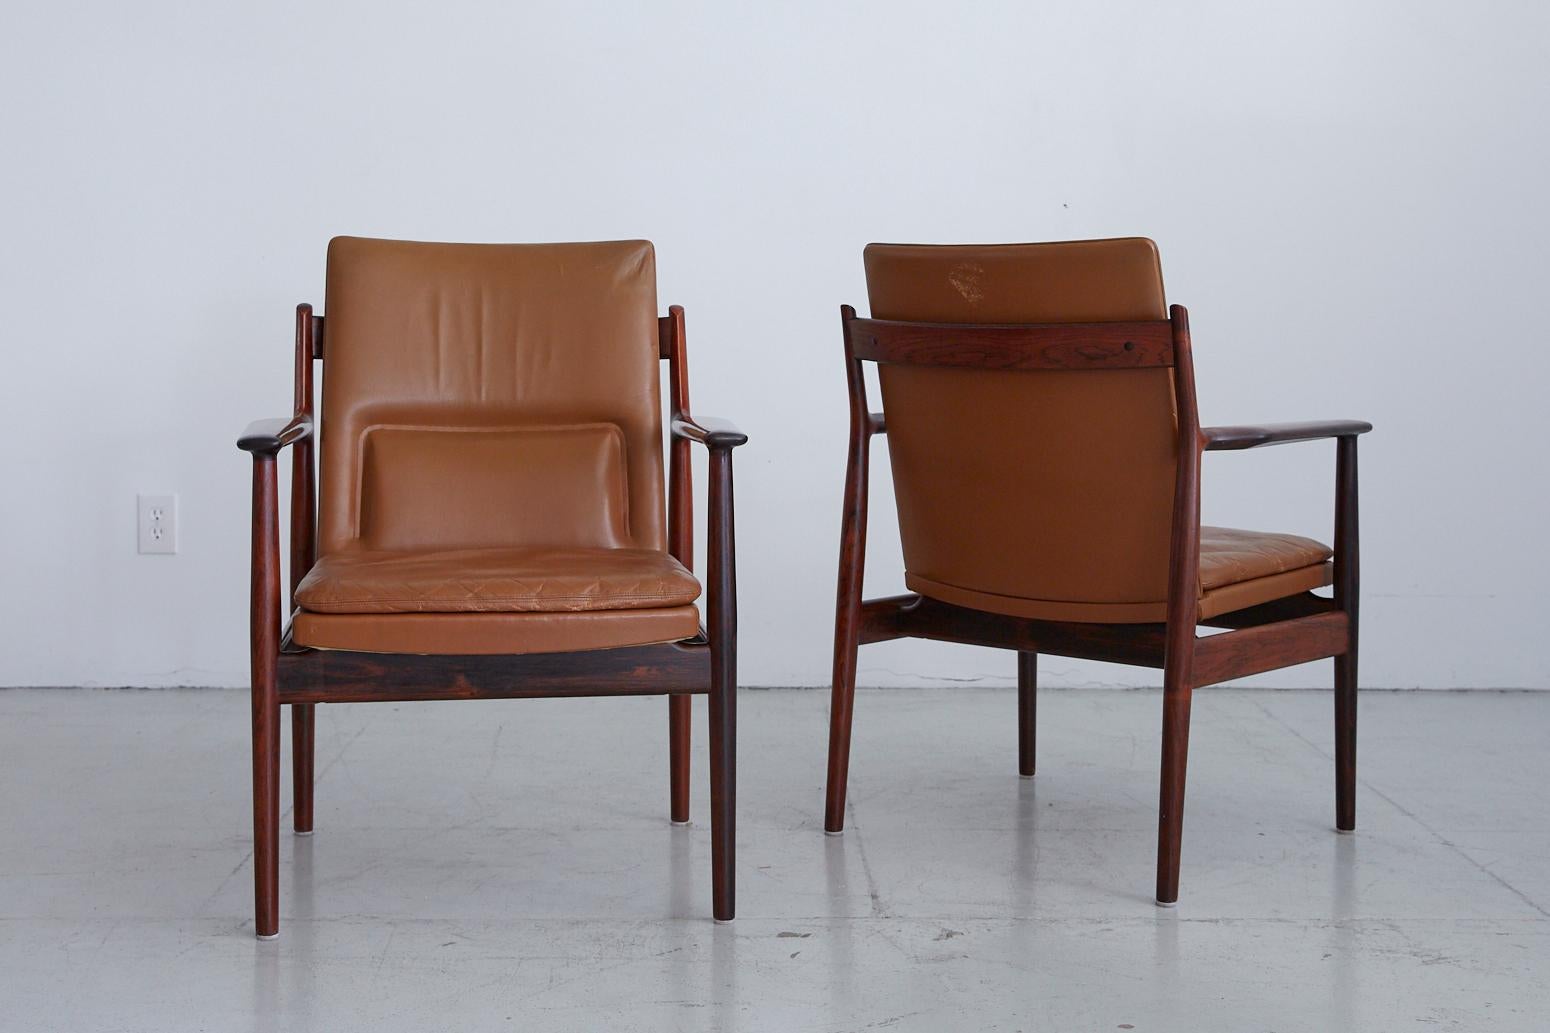 Handsome pair of armchairs designed by Arne Vodder. Beautiful rosewood frames with original tan leather seat with great coloring and patina.